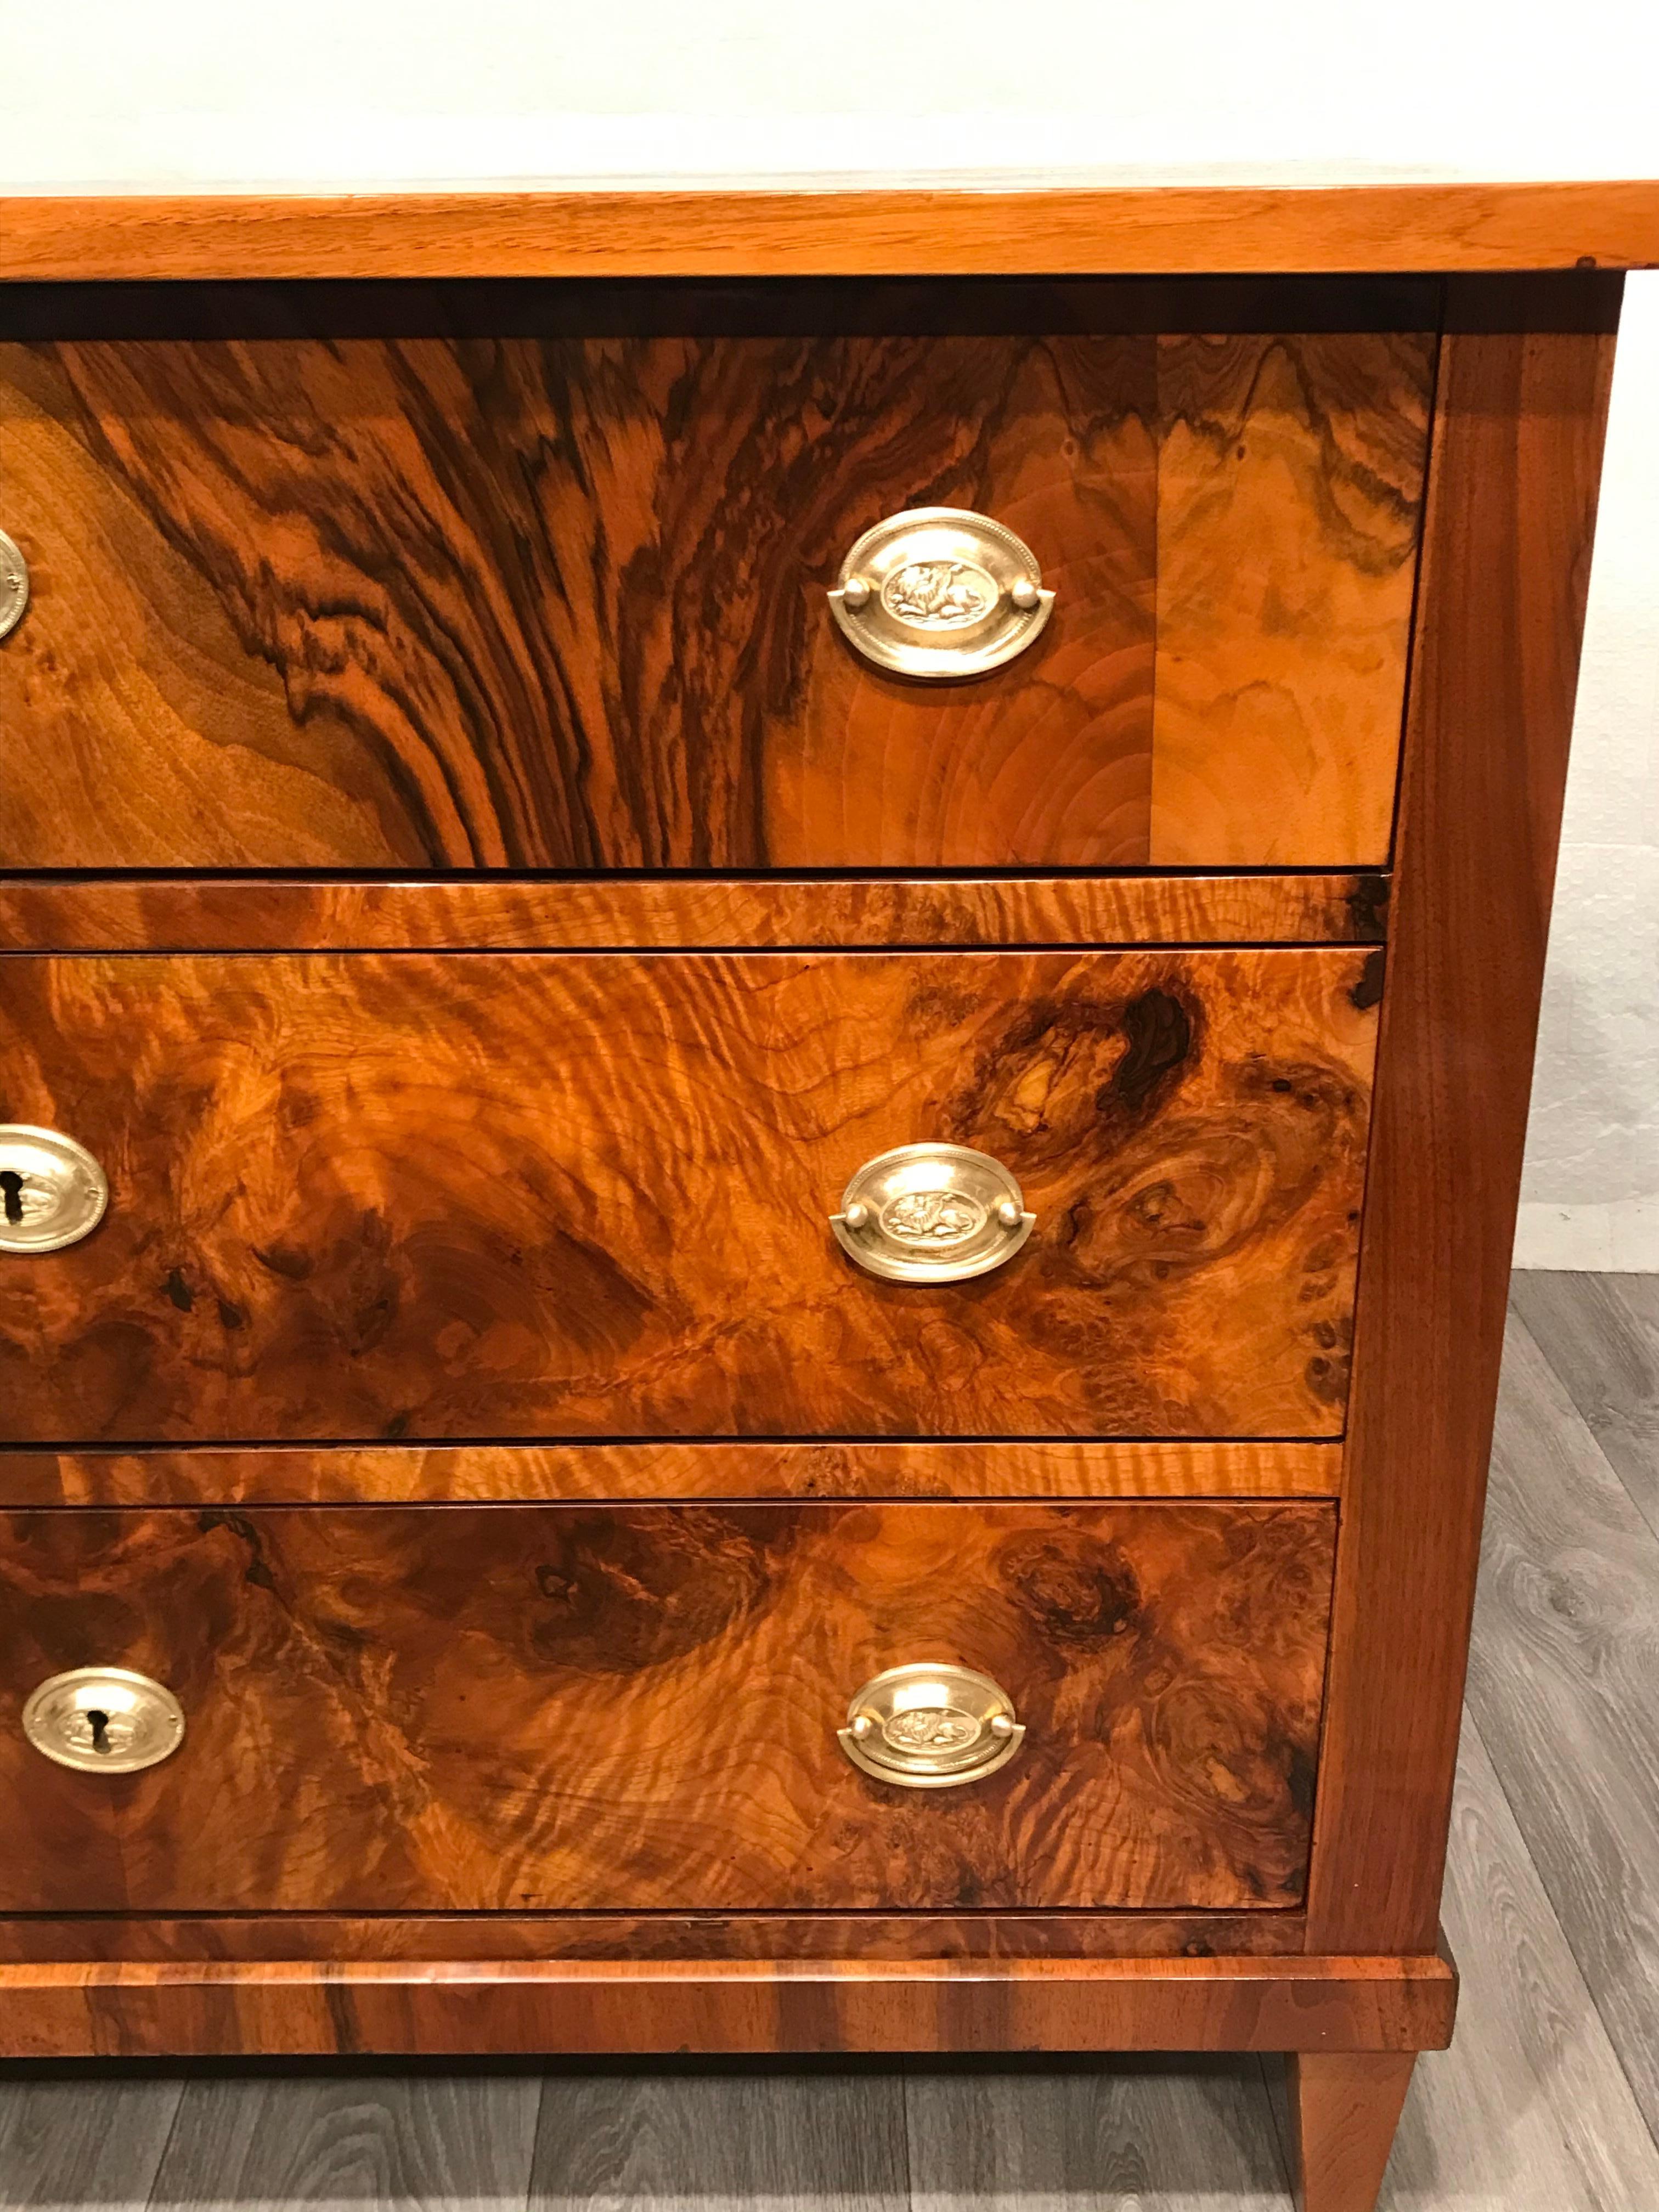 This Biedermeier chest of drawers is embellished with a beautiful walnut veneer. 
The three drawer commode offers a lot of storage space and stands out for its unpretentious and elegant design.
The chest of drawers is in very good refinished